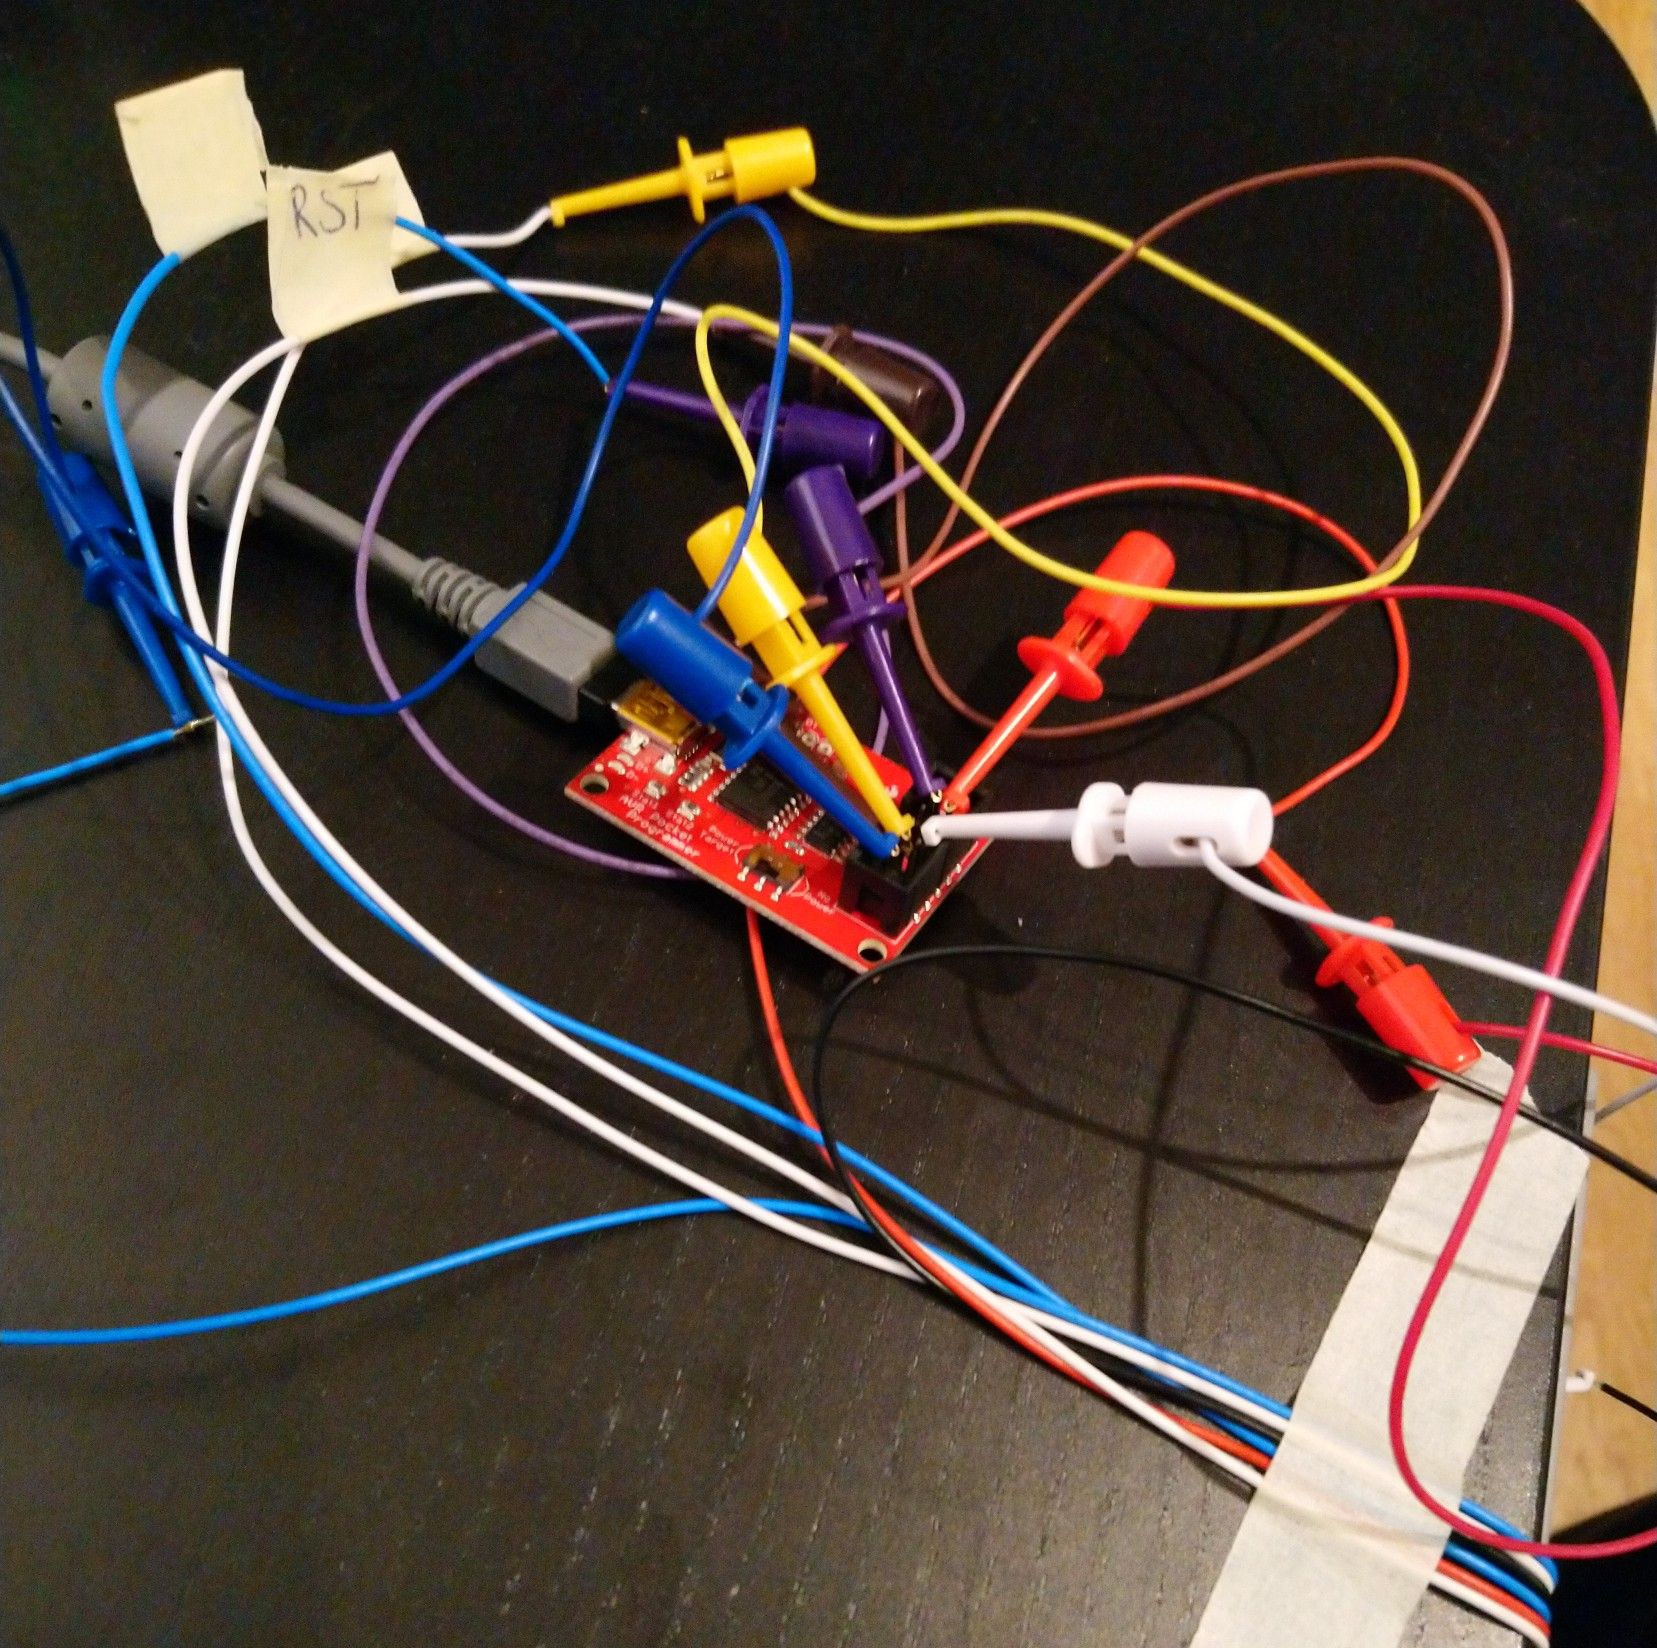 Ikea Bekant table control over MQTT with Megadesk and ESP32